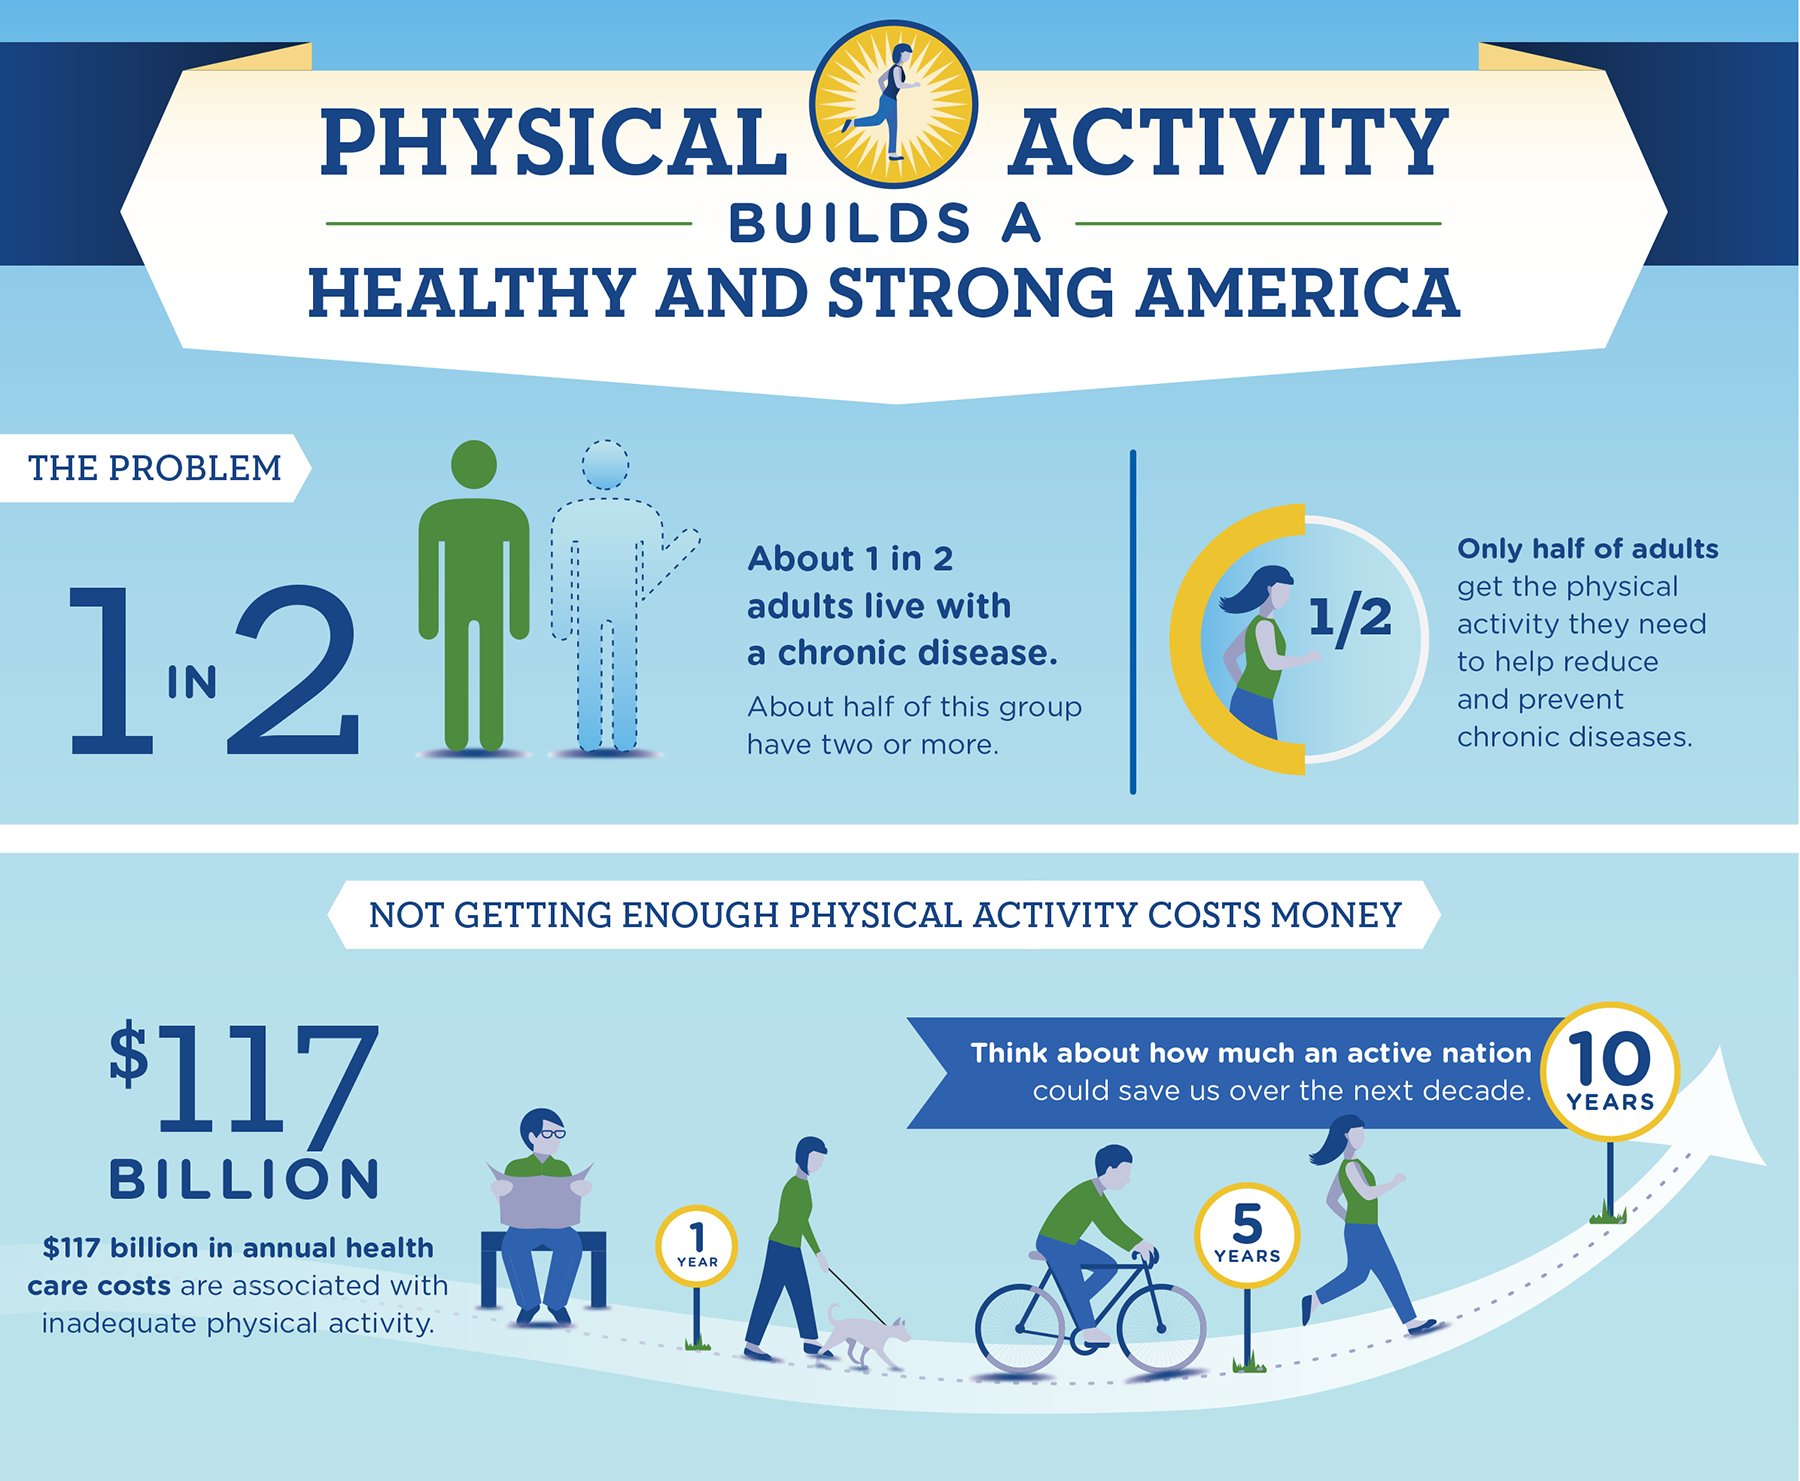 TN Dept. of Health on Twitter: "Physically active people generally live longer and are at less risk for serious health problems like heart disease and diabetes. 1 in 10 deaths could be